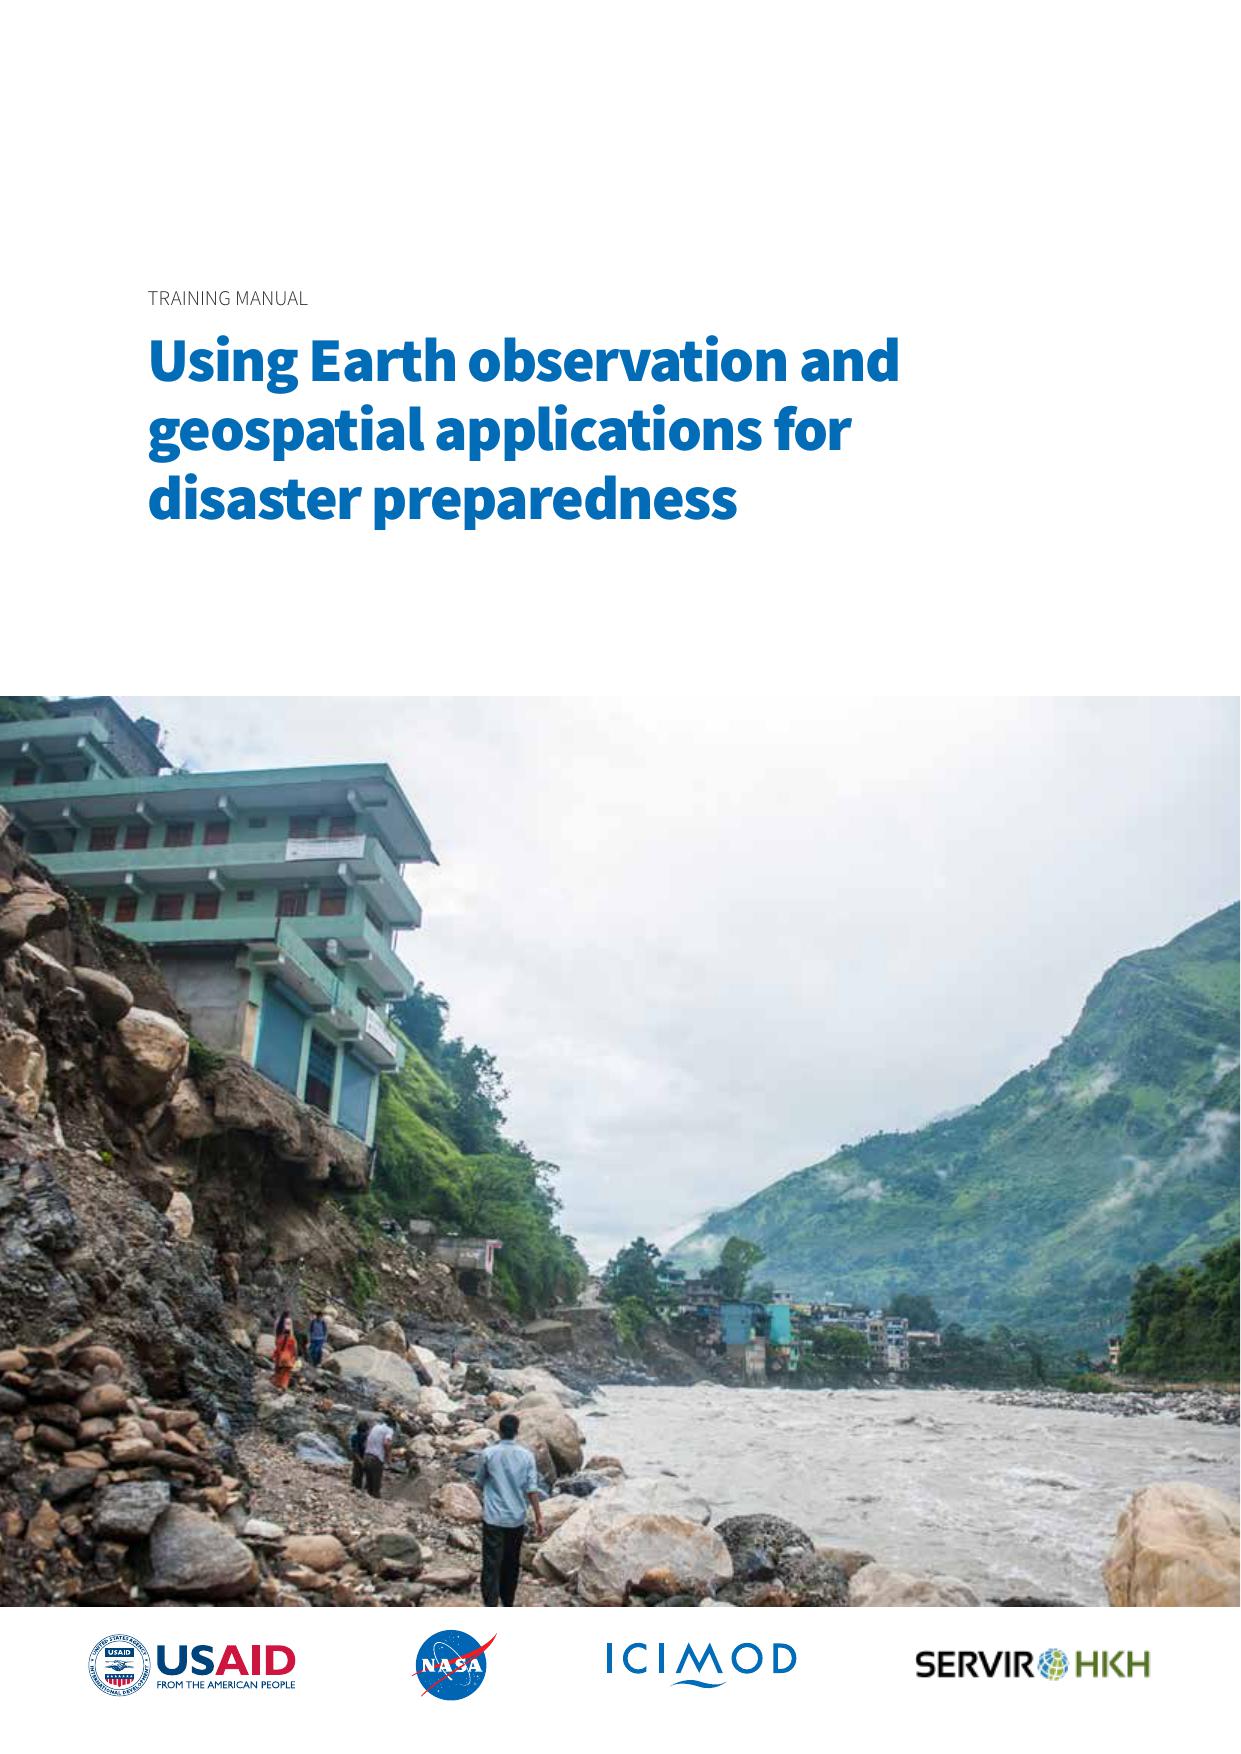 Using Earth observation and geospatial applications for disaster preparedness - training manual